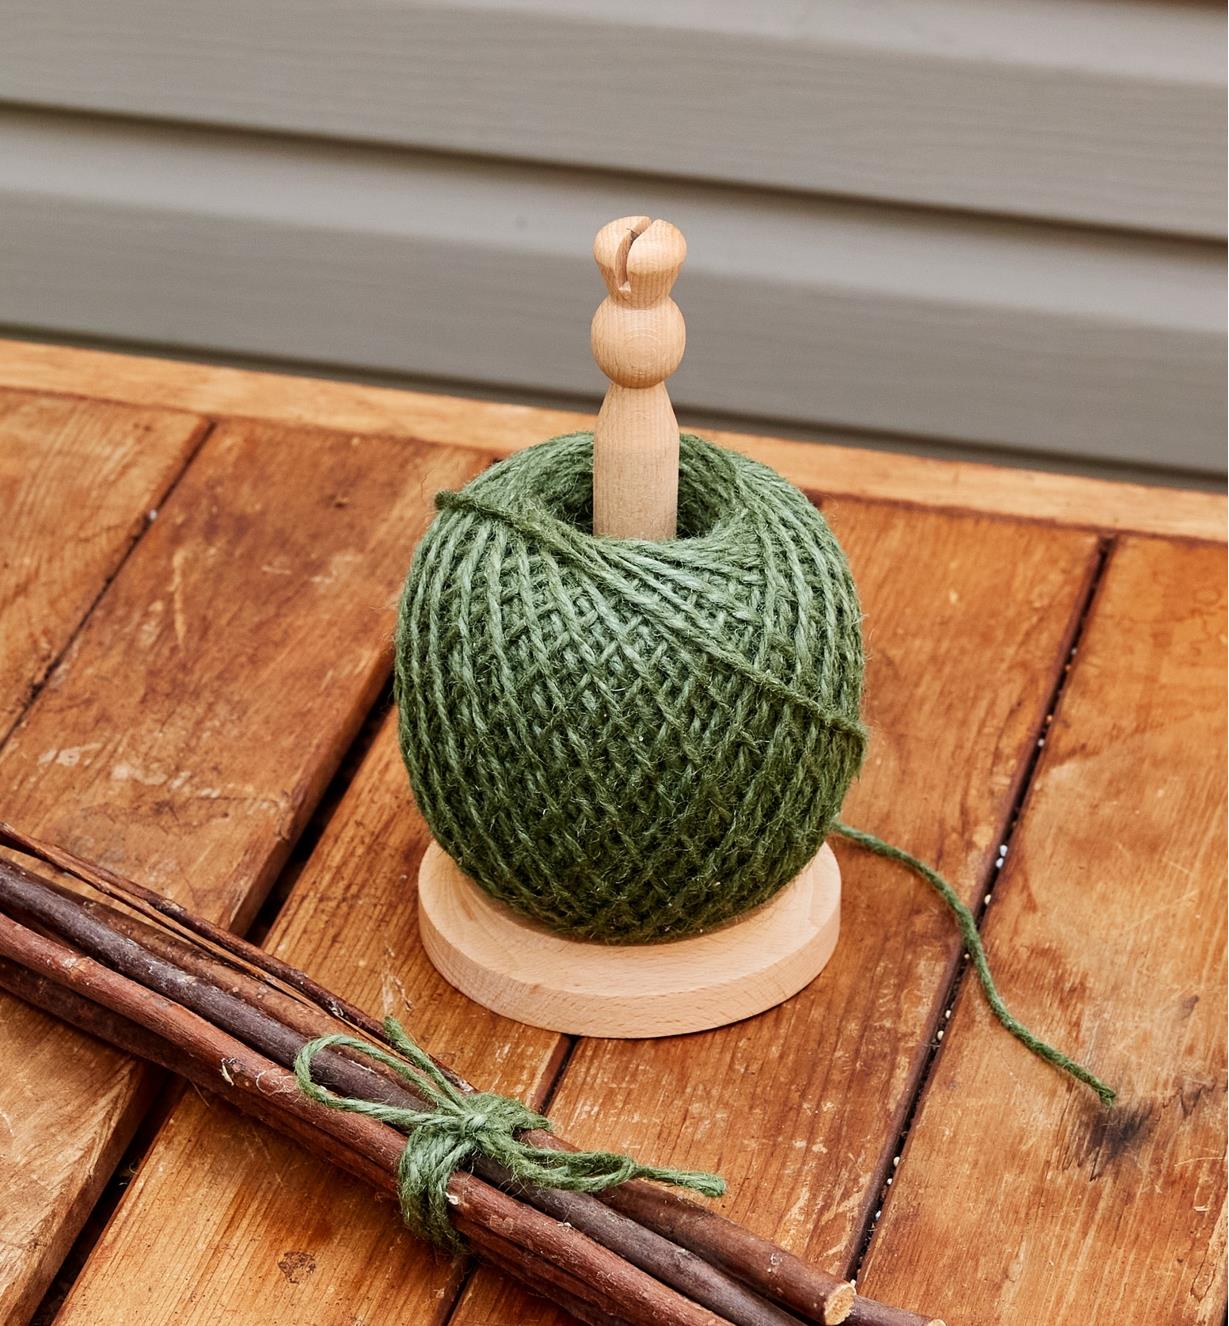 A ball of garden twine on a twine dispenser sits on a wood table next to a bundle of sticks